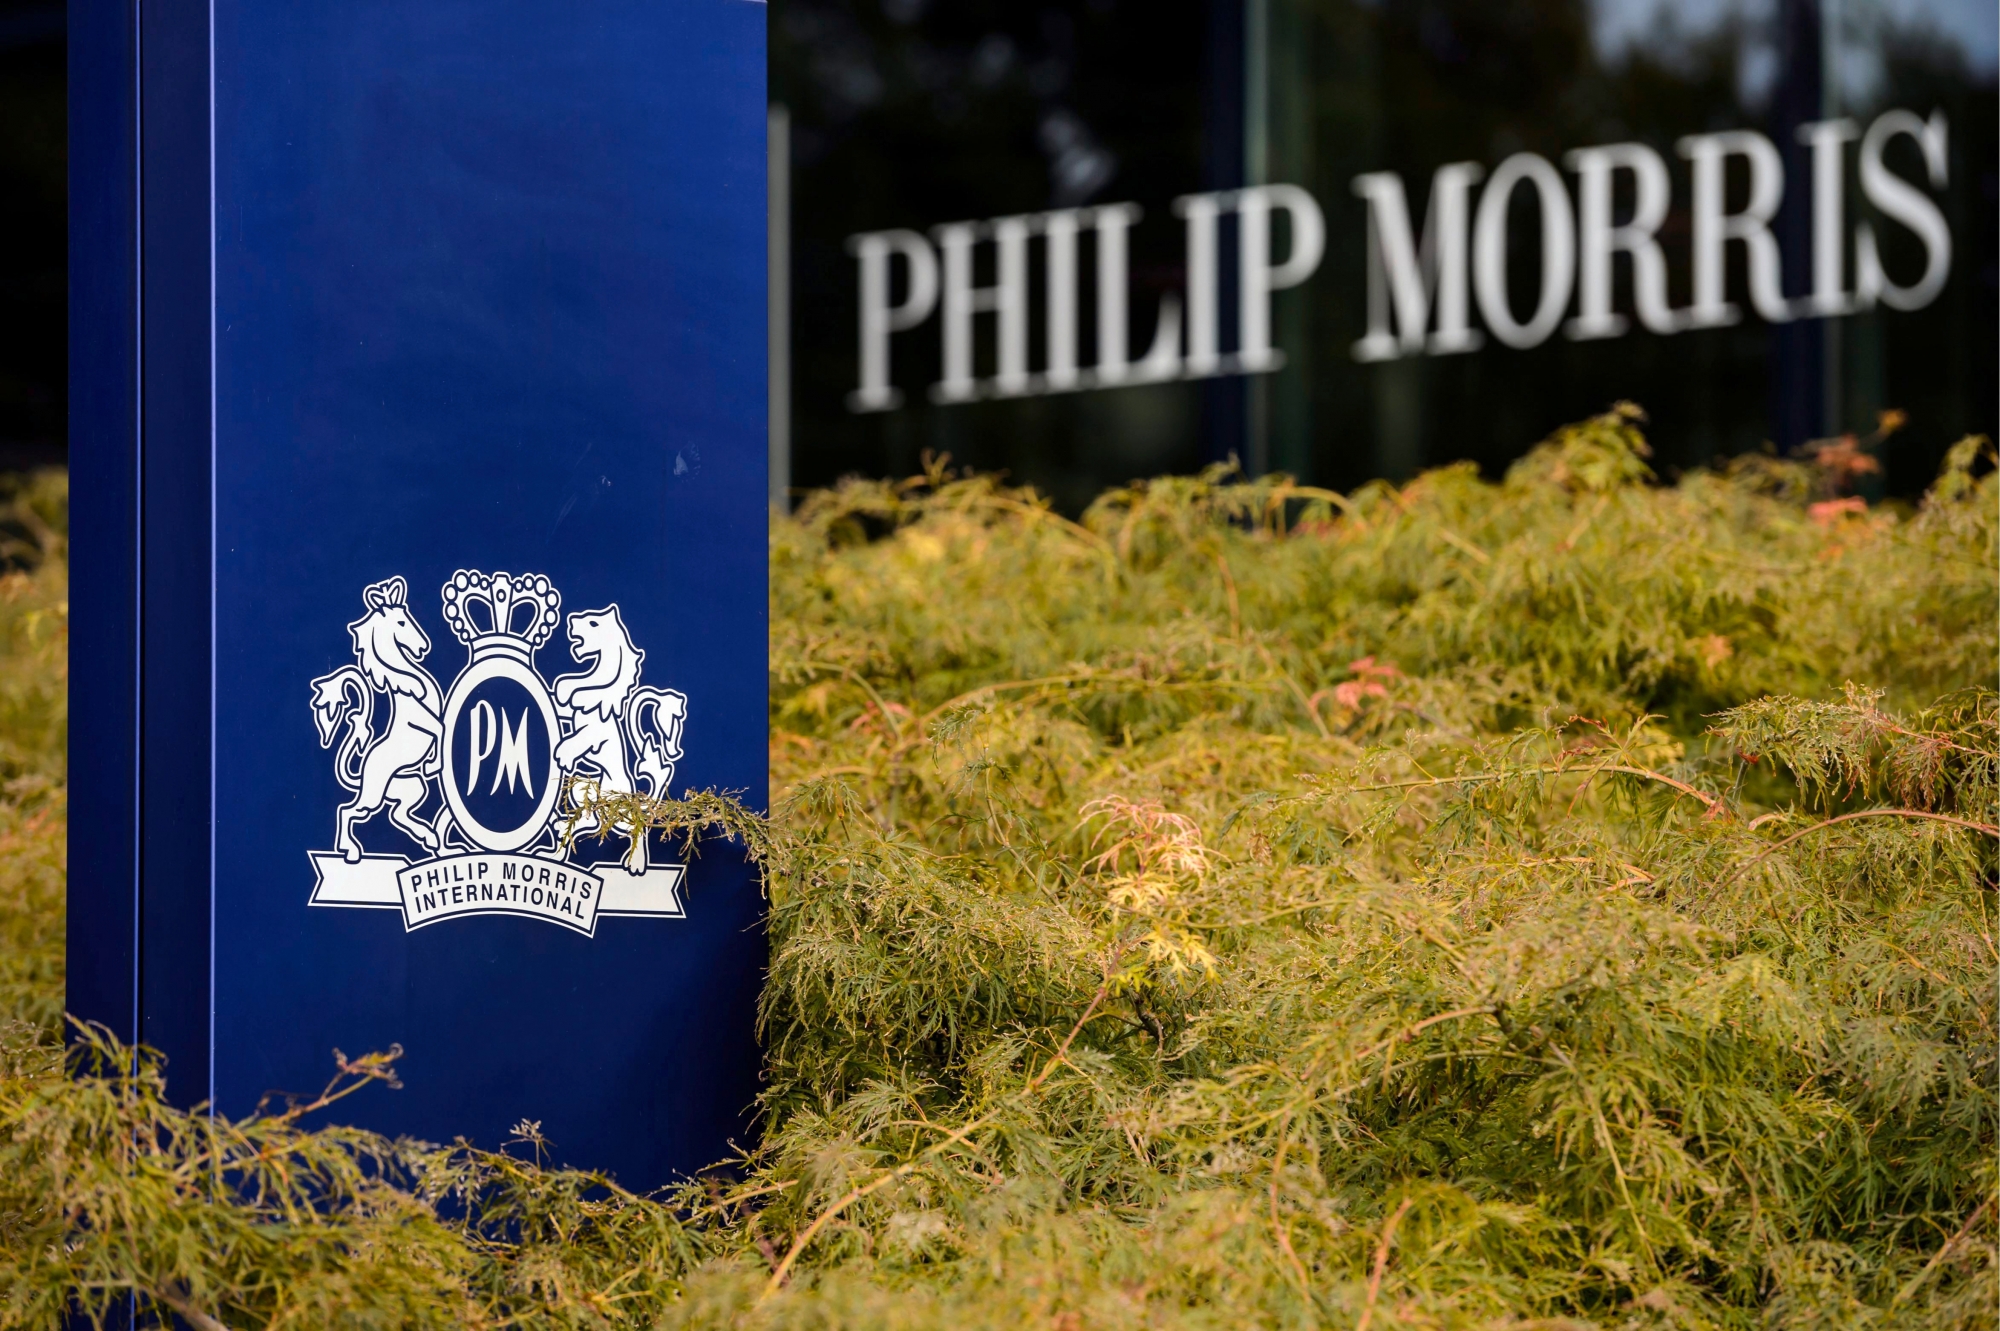 The international headquarters of the US tobacco company Philip Morris in Lausanne, Switzerland, Monday, September 30, 2013. Today Philip Morris announced it would cut its Switzerland workforce by 170 jobs.  (KEYSTONE/Laurent Gillieron) SWITZERLAND ECONOMY PHILIPP MORRIS